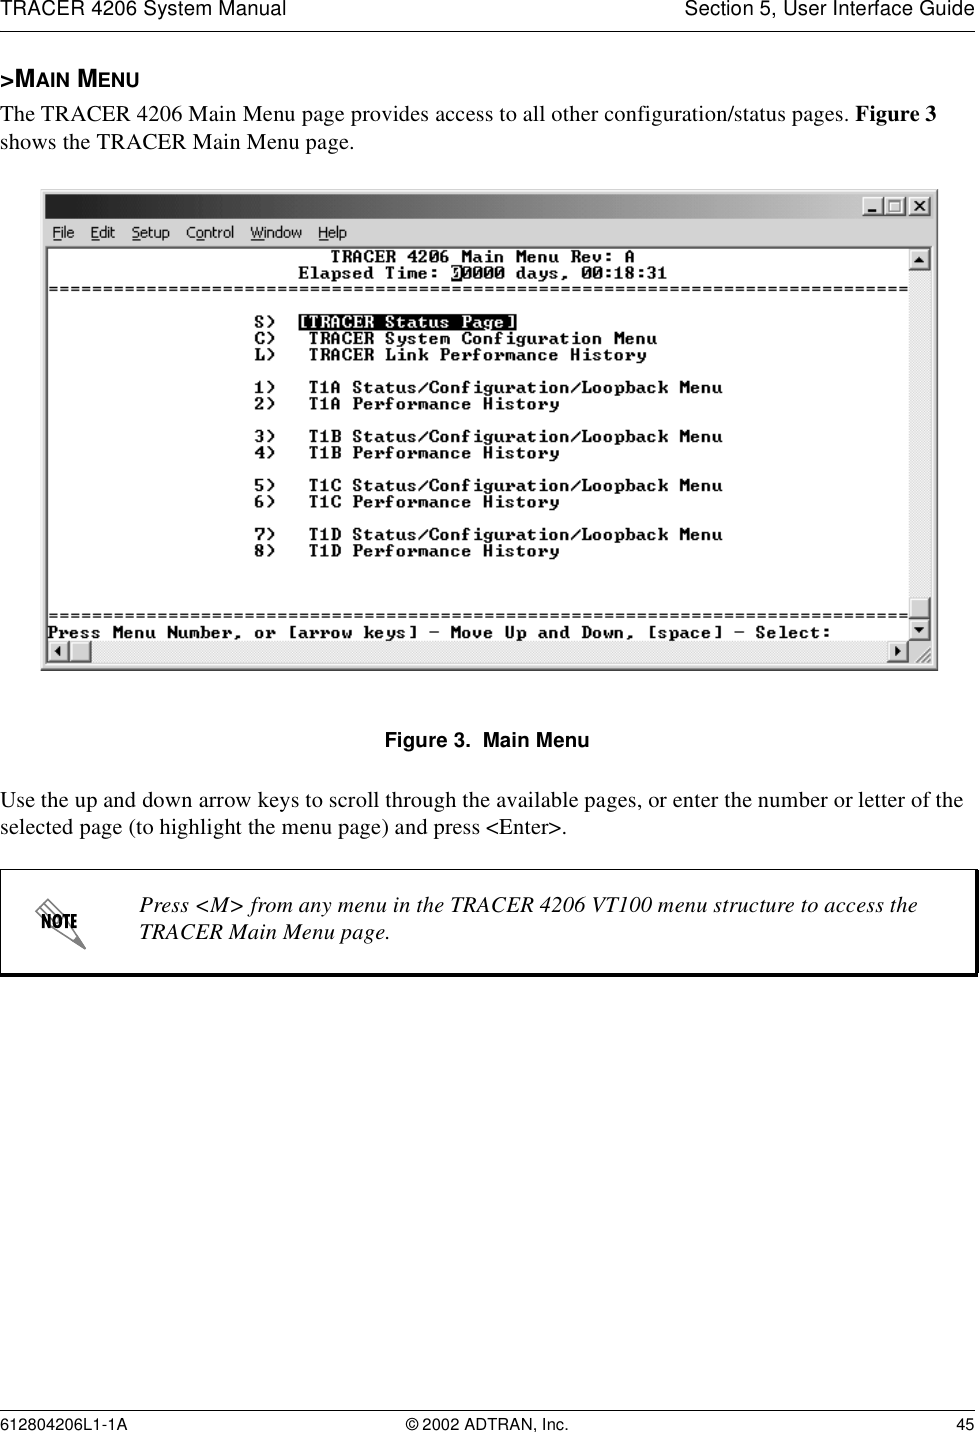 TRACER 4206 System Manual Section 5, User Interface Guide612804206L1-1A © 2002 ADTRAN, Inc. 45&gt;MAIN MENUThe TRACER 4206 Main Menu page provides access to all other configuration/status pages. Figure 3 shows the TRACER Main Menu page.Figure 3.  Main MenuUse the up and down arrow keys to scroll through the available pages, or enter the number or letter of the selected page (to highlight the menu page) and press &lt;Enter&gt;.Press &lt;M&gt; from any menu in the TRACER 4206 VT100 menu structure to access the TRACER Main Menu page.